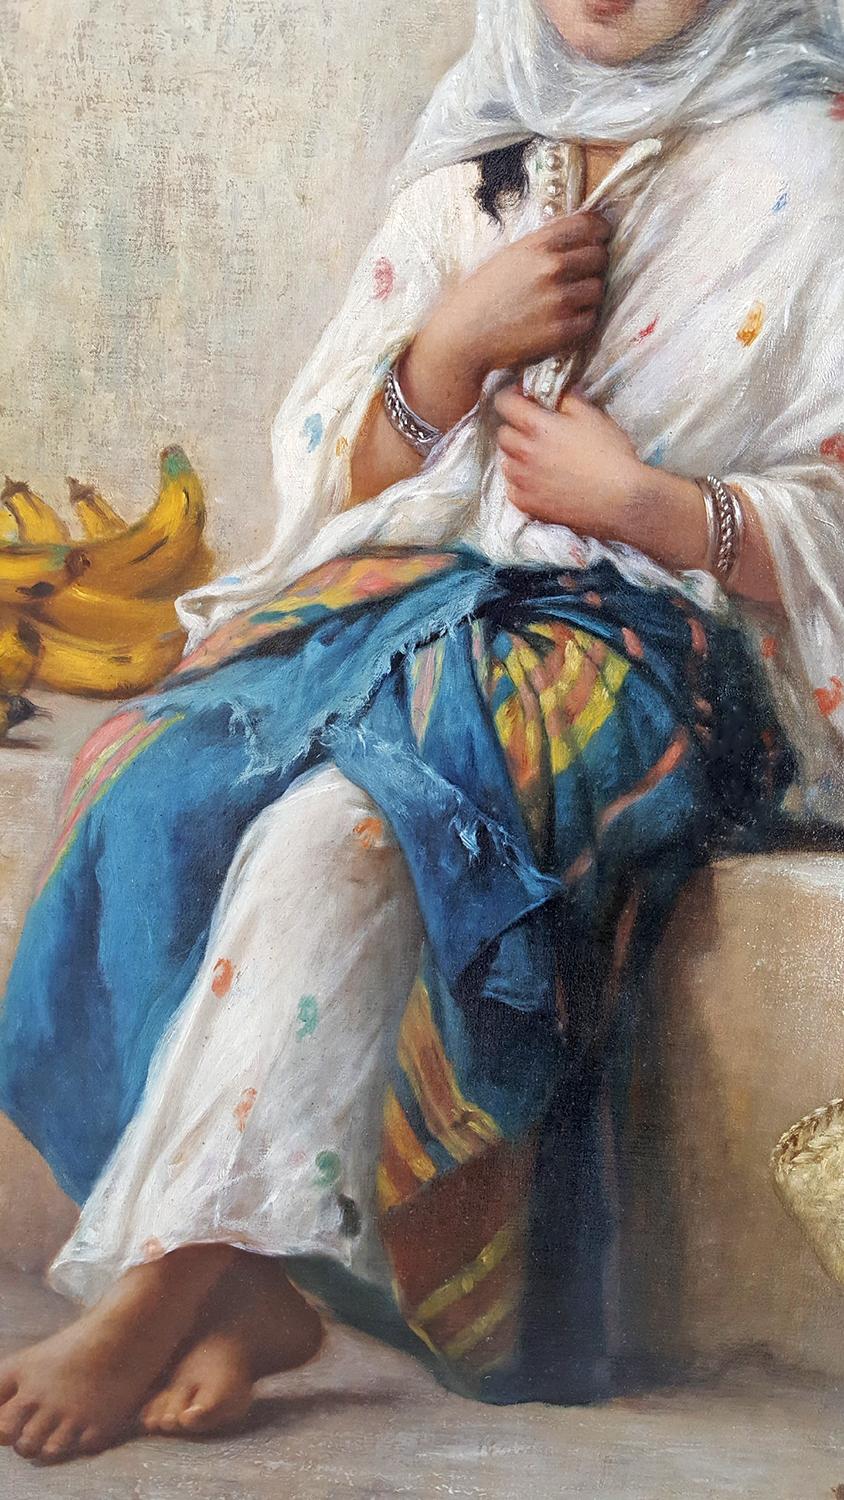 Beautiful Orientalist  painting  - The Framed size: 47 inches x 34.5 inches.   Magnificent ornate Frame
The work looks much better in person as if it came out of the Musée d'Orsay in Paris

The paint surface looks like the style of William-Adolphe